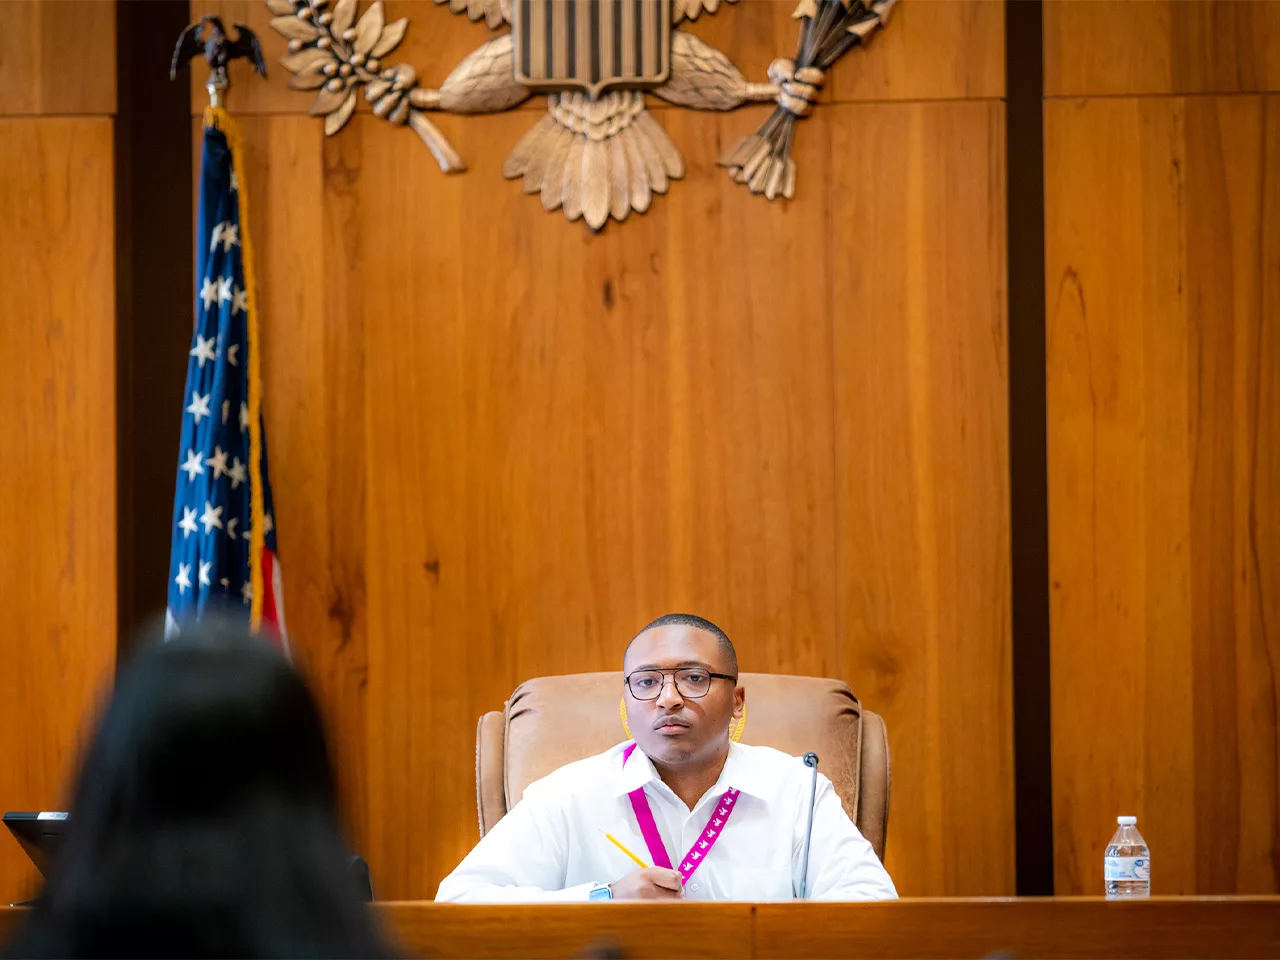 A teen sits in the judge's bench of a federal courthouse weighing the merits of a case.